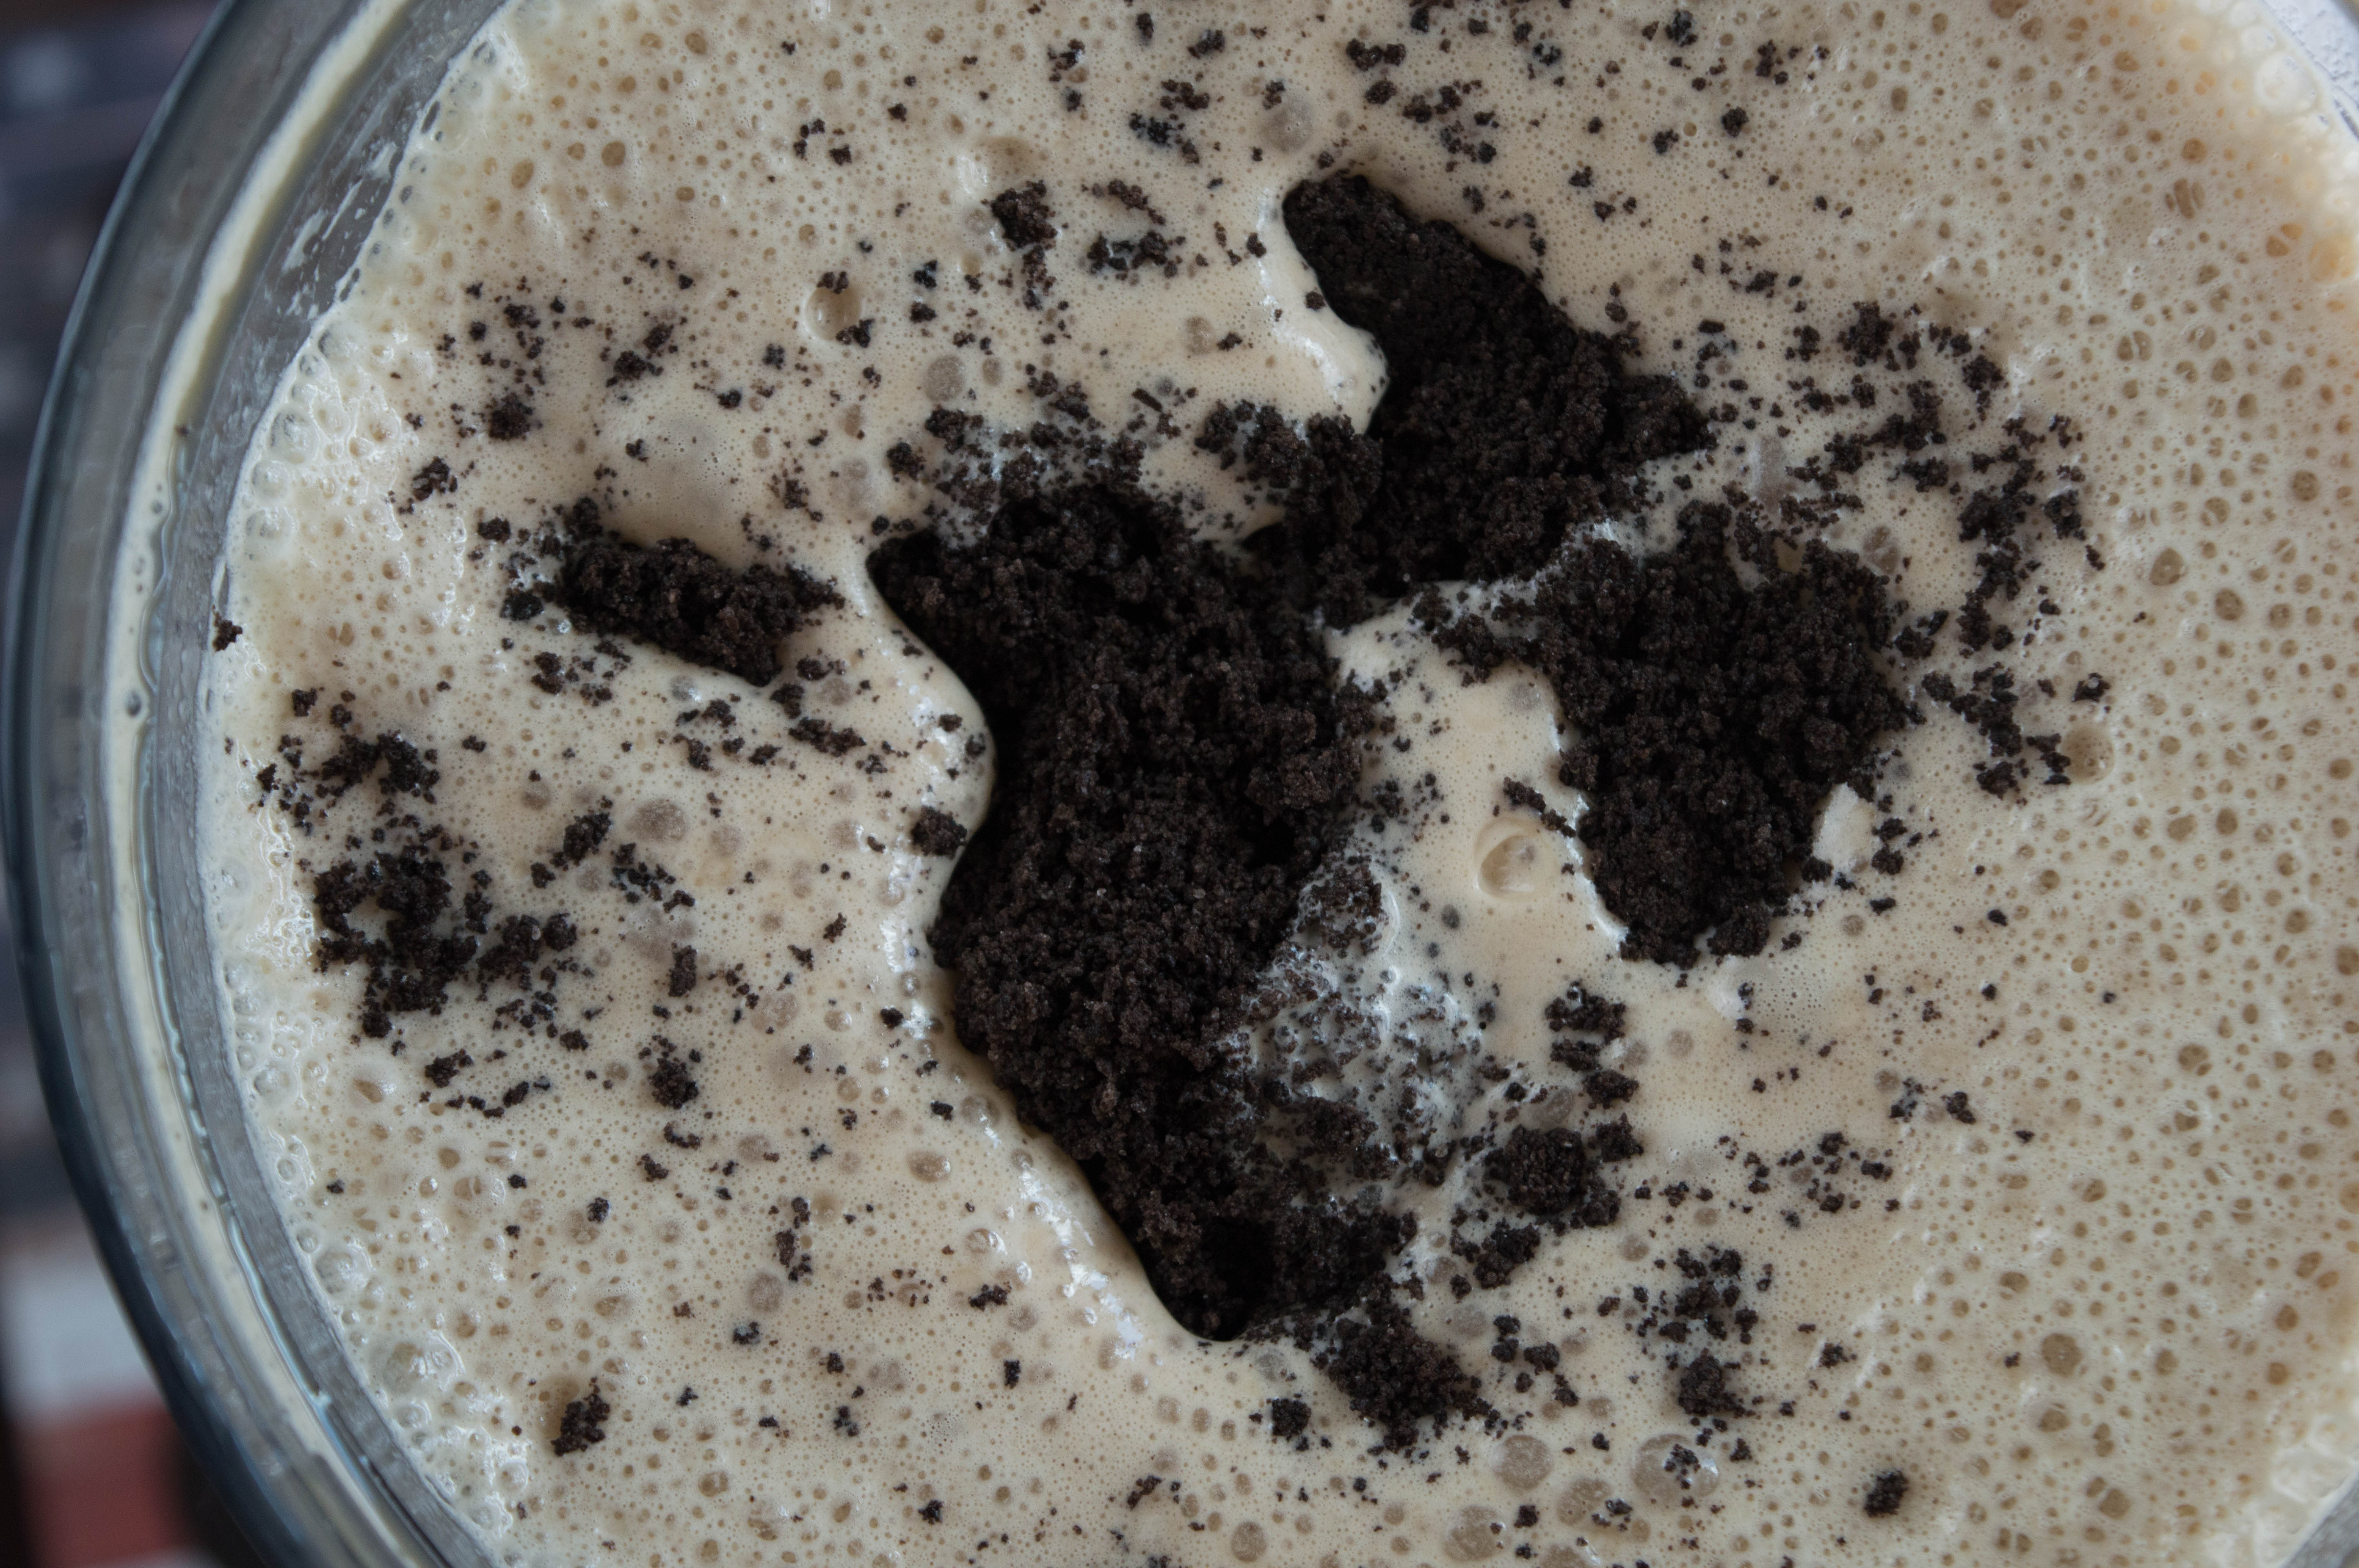 Looking for a dessert cocktail recipe? This recipe takes a mudslide and take it to a new level. This cookies and cream frozen cocktail is a perfect treat.